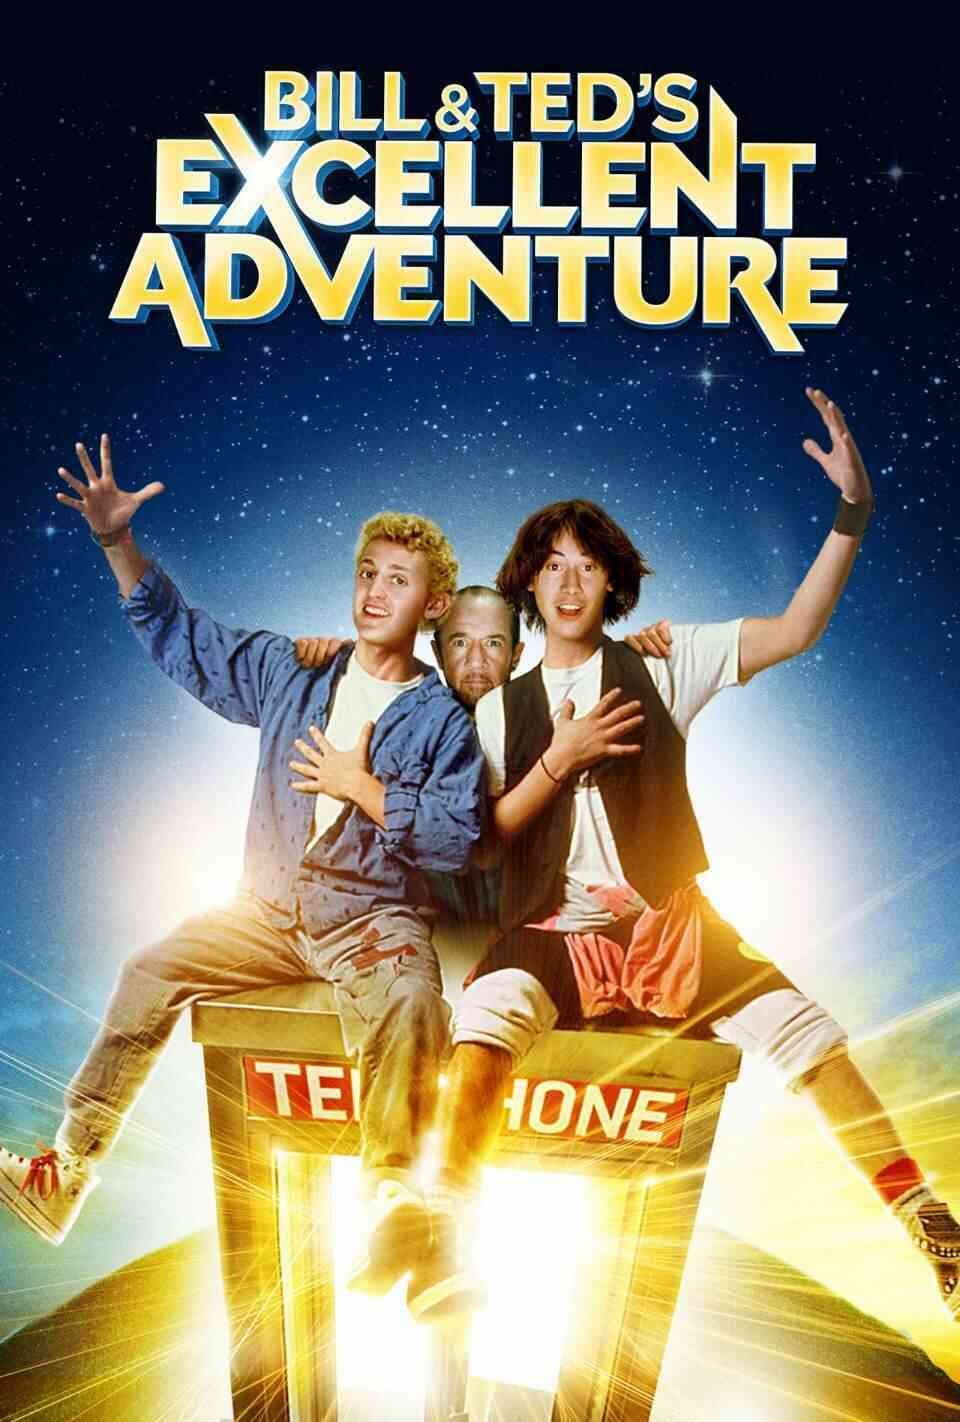 Read Bill & Ted's Excellent Adventure screenplay (poster)